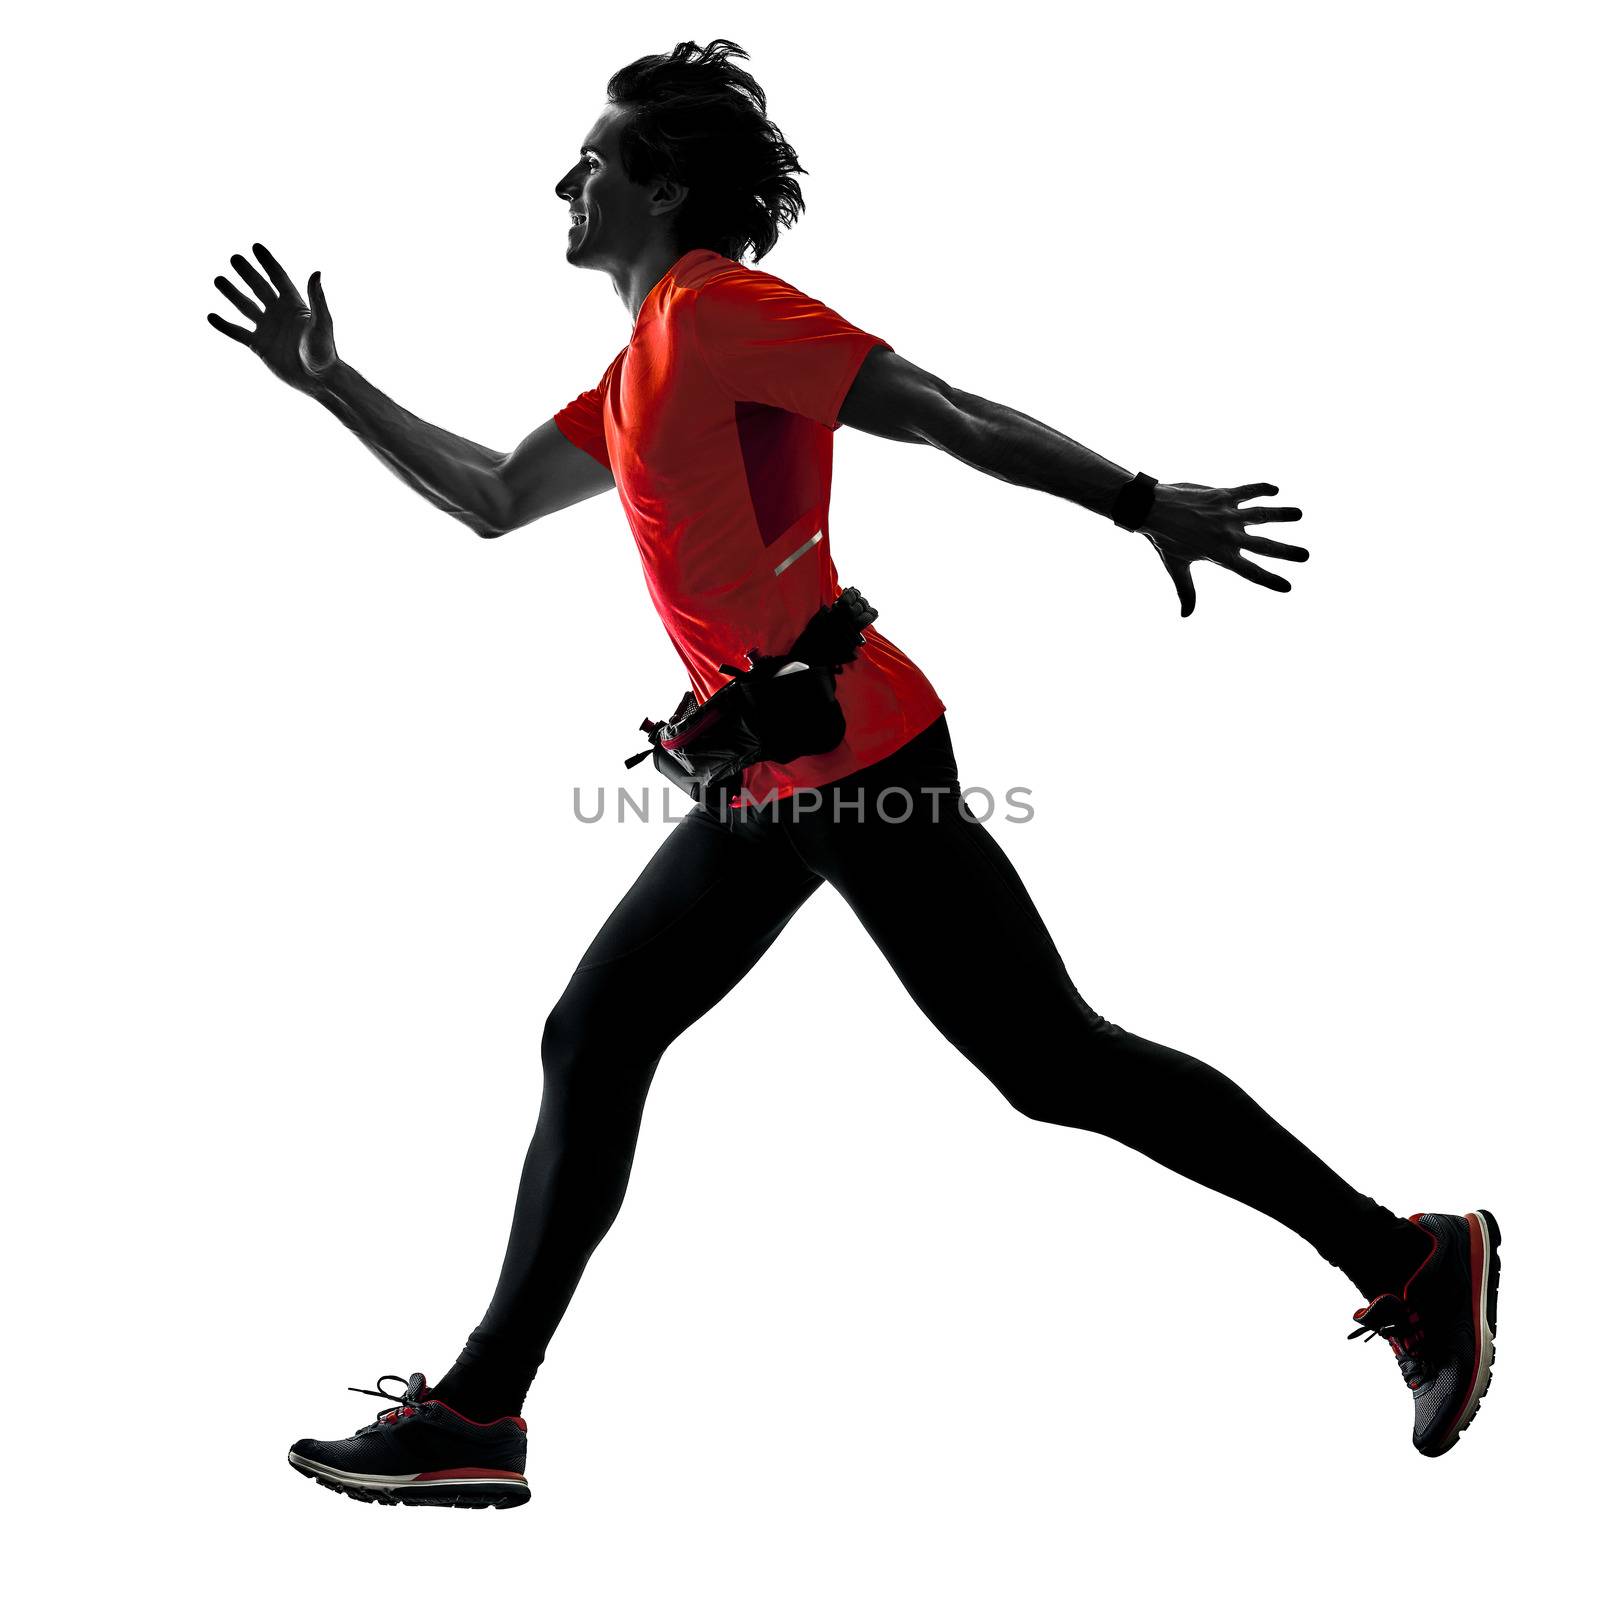 one caucasian man pratcticing runner running jogger jogging in studio silhouette isolated on white background